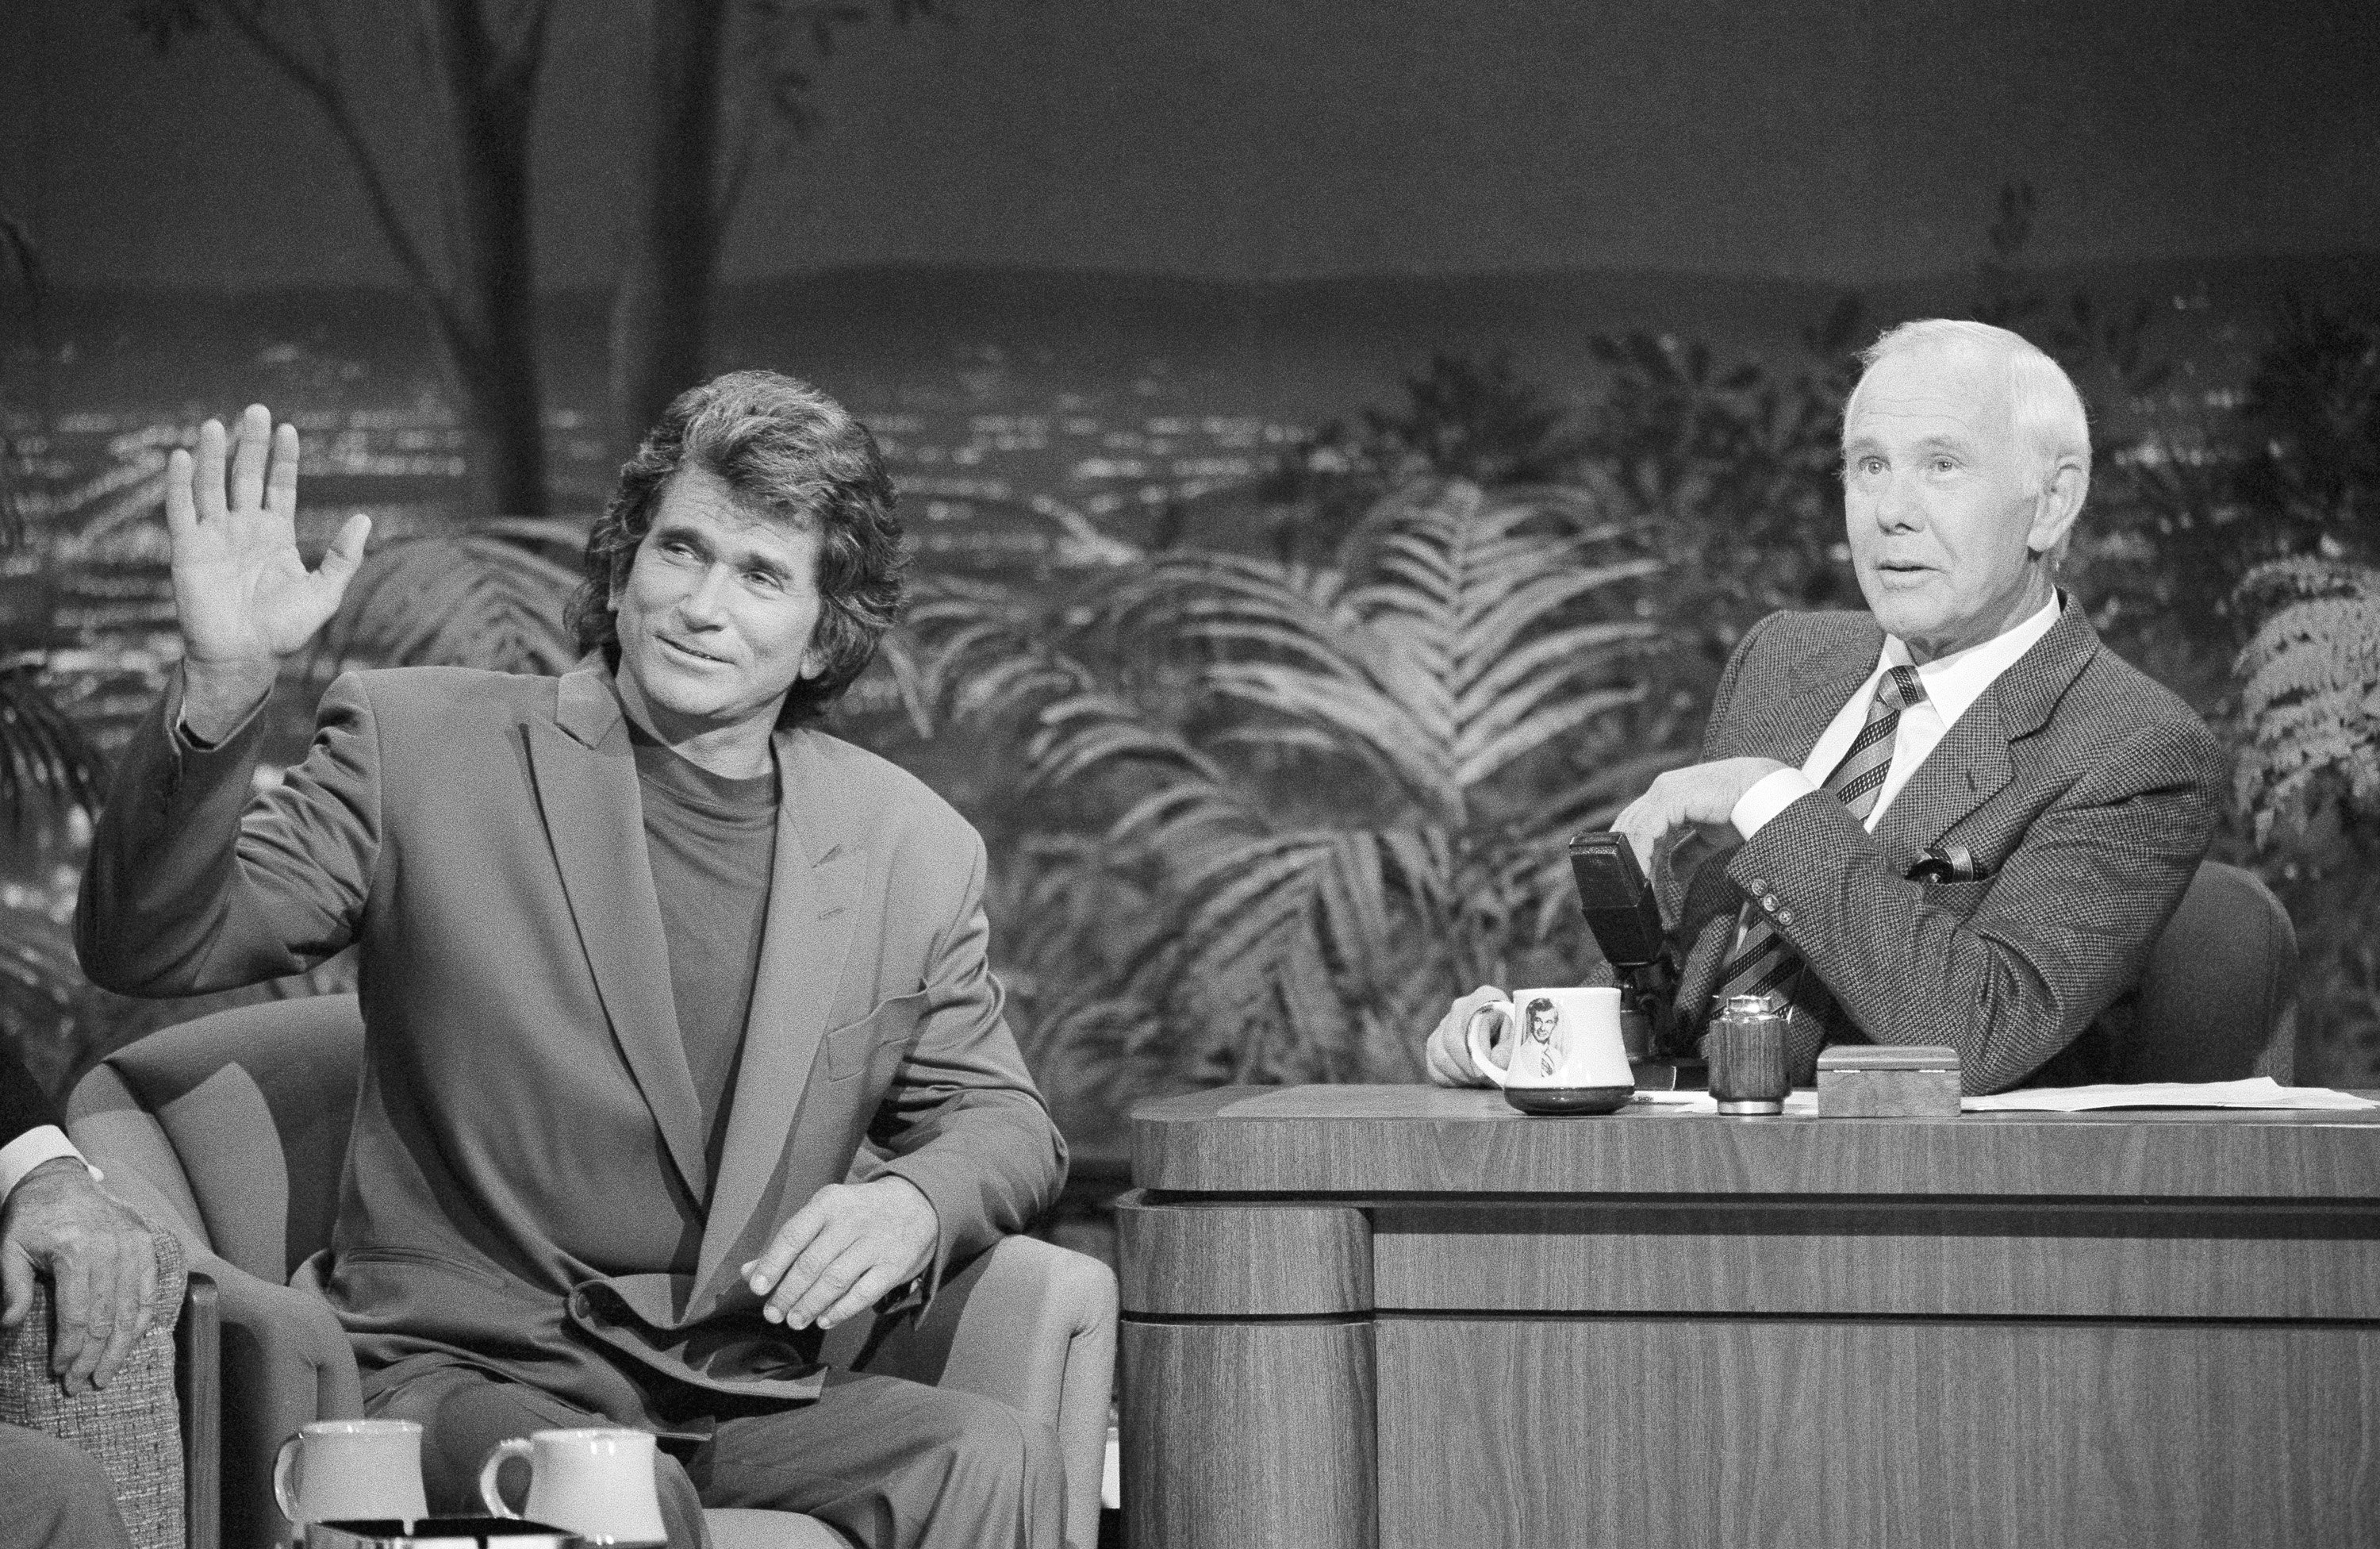 THE TONIGHT SHOW STARRING JOHNNY CARSON -- Aired 2/15/91 -- Pictured: (l-r) Actor Michael Landon during an interview with host Johnny Carson on February 15, 1991